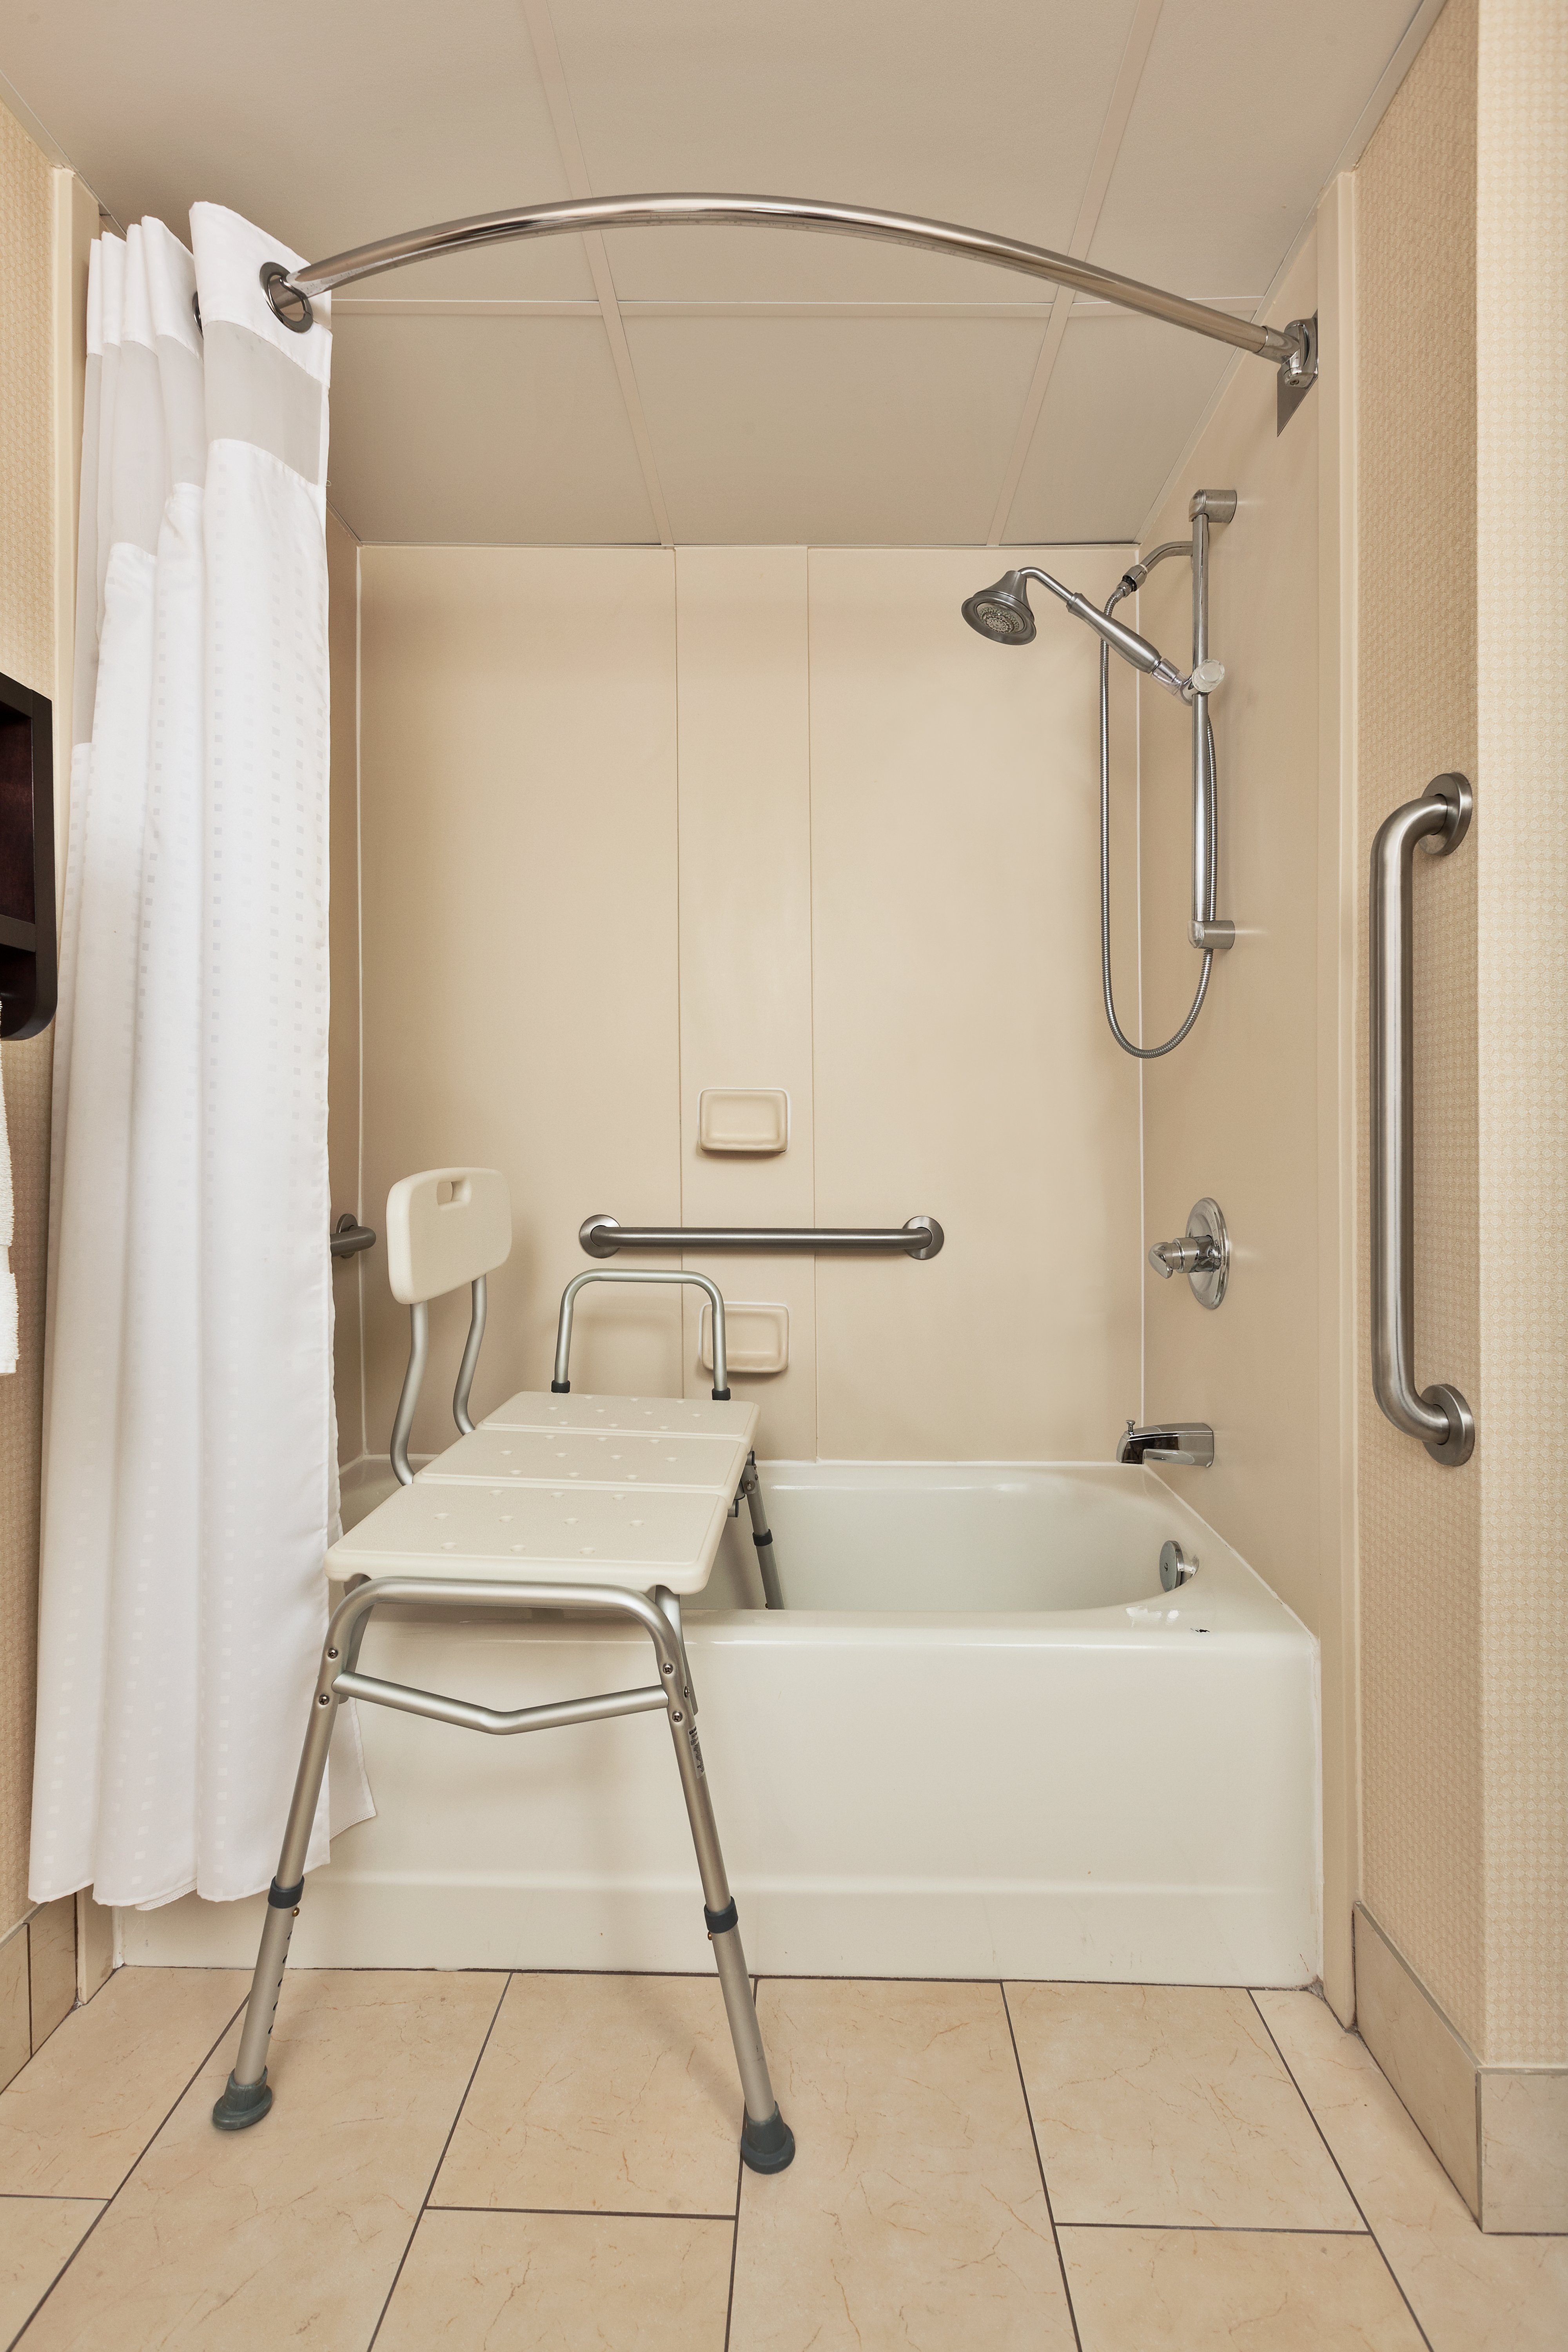 ADA/Handicapped Guest Bathroom with Transfer Tub